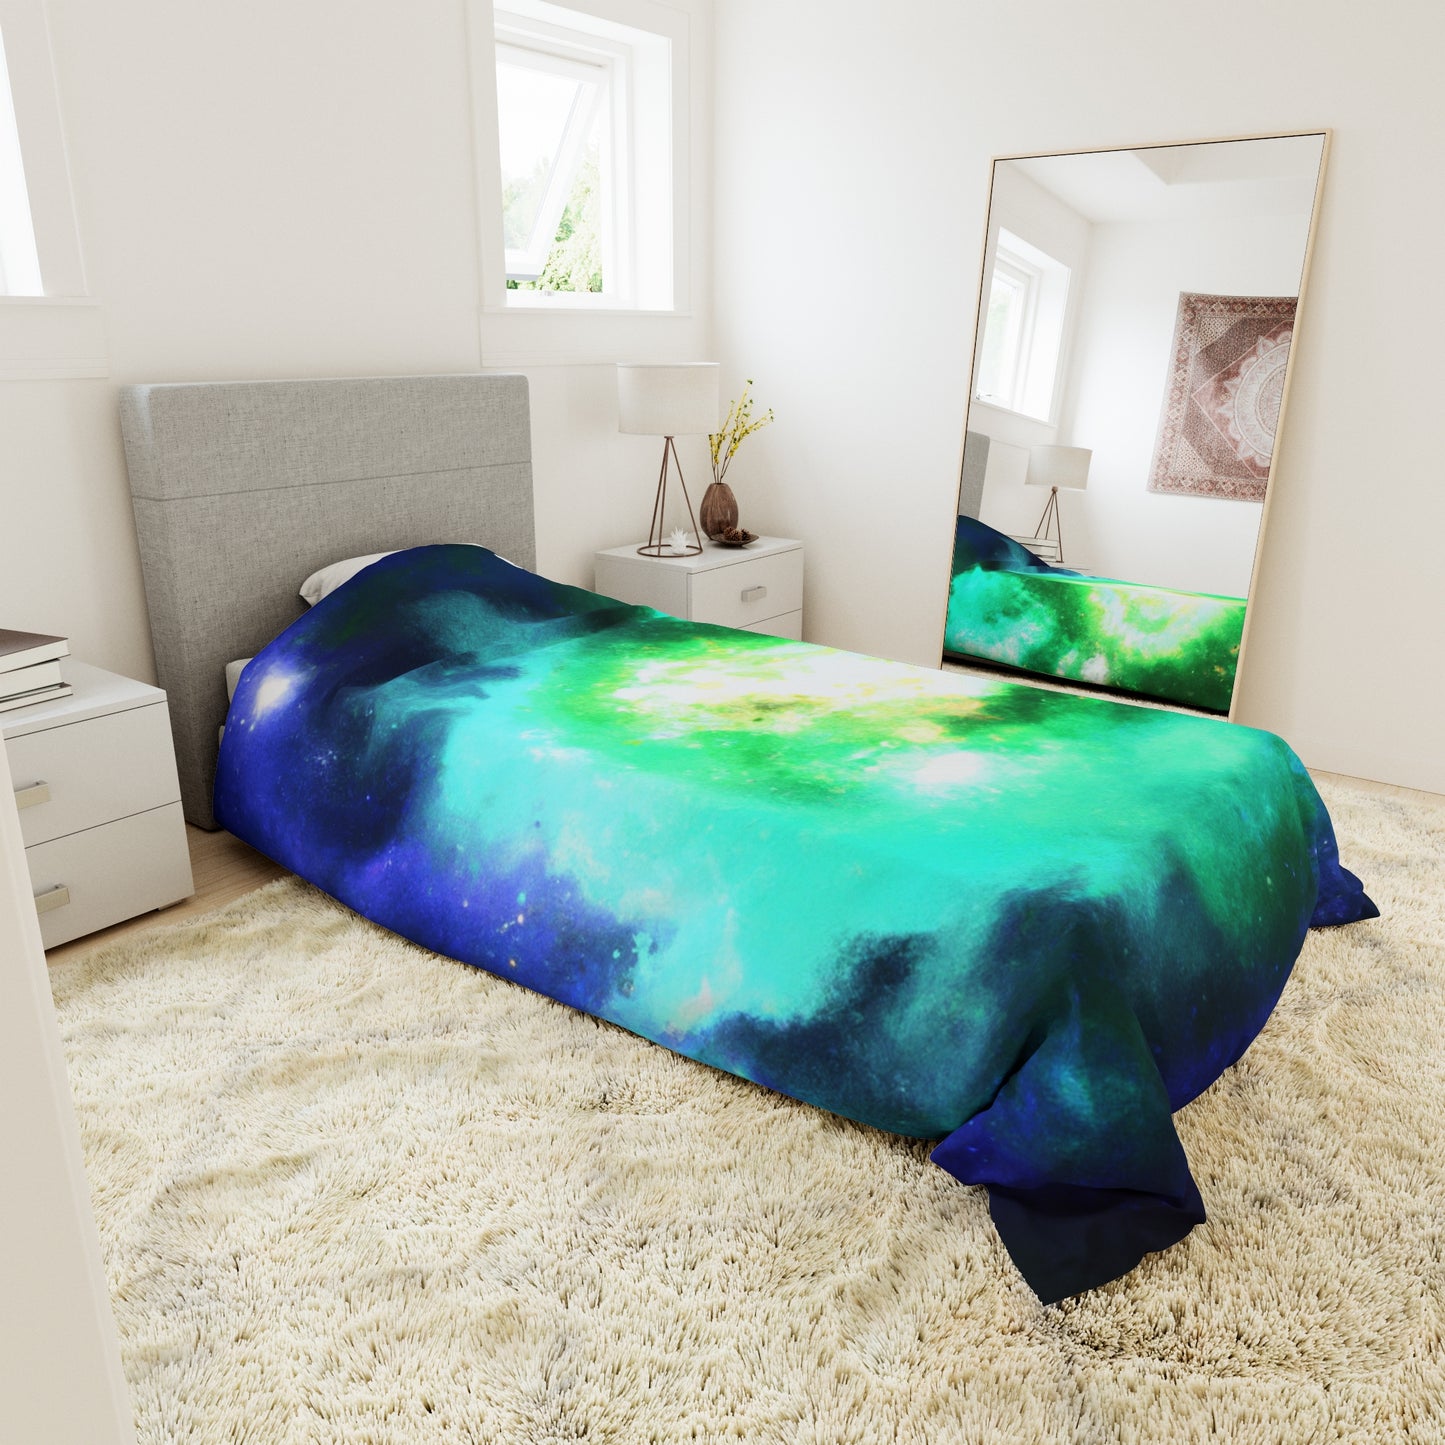 Moonlight Melody - Astronomy Duvet Bed Cover